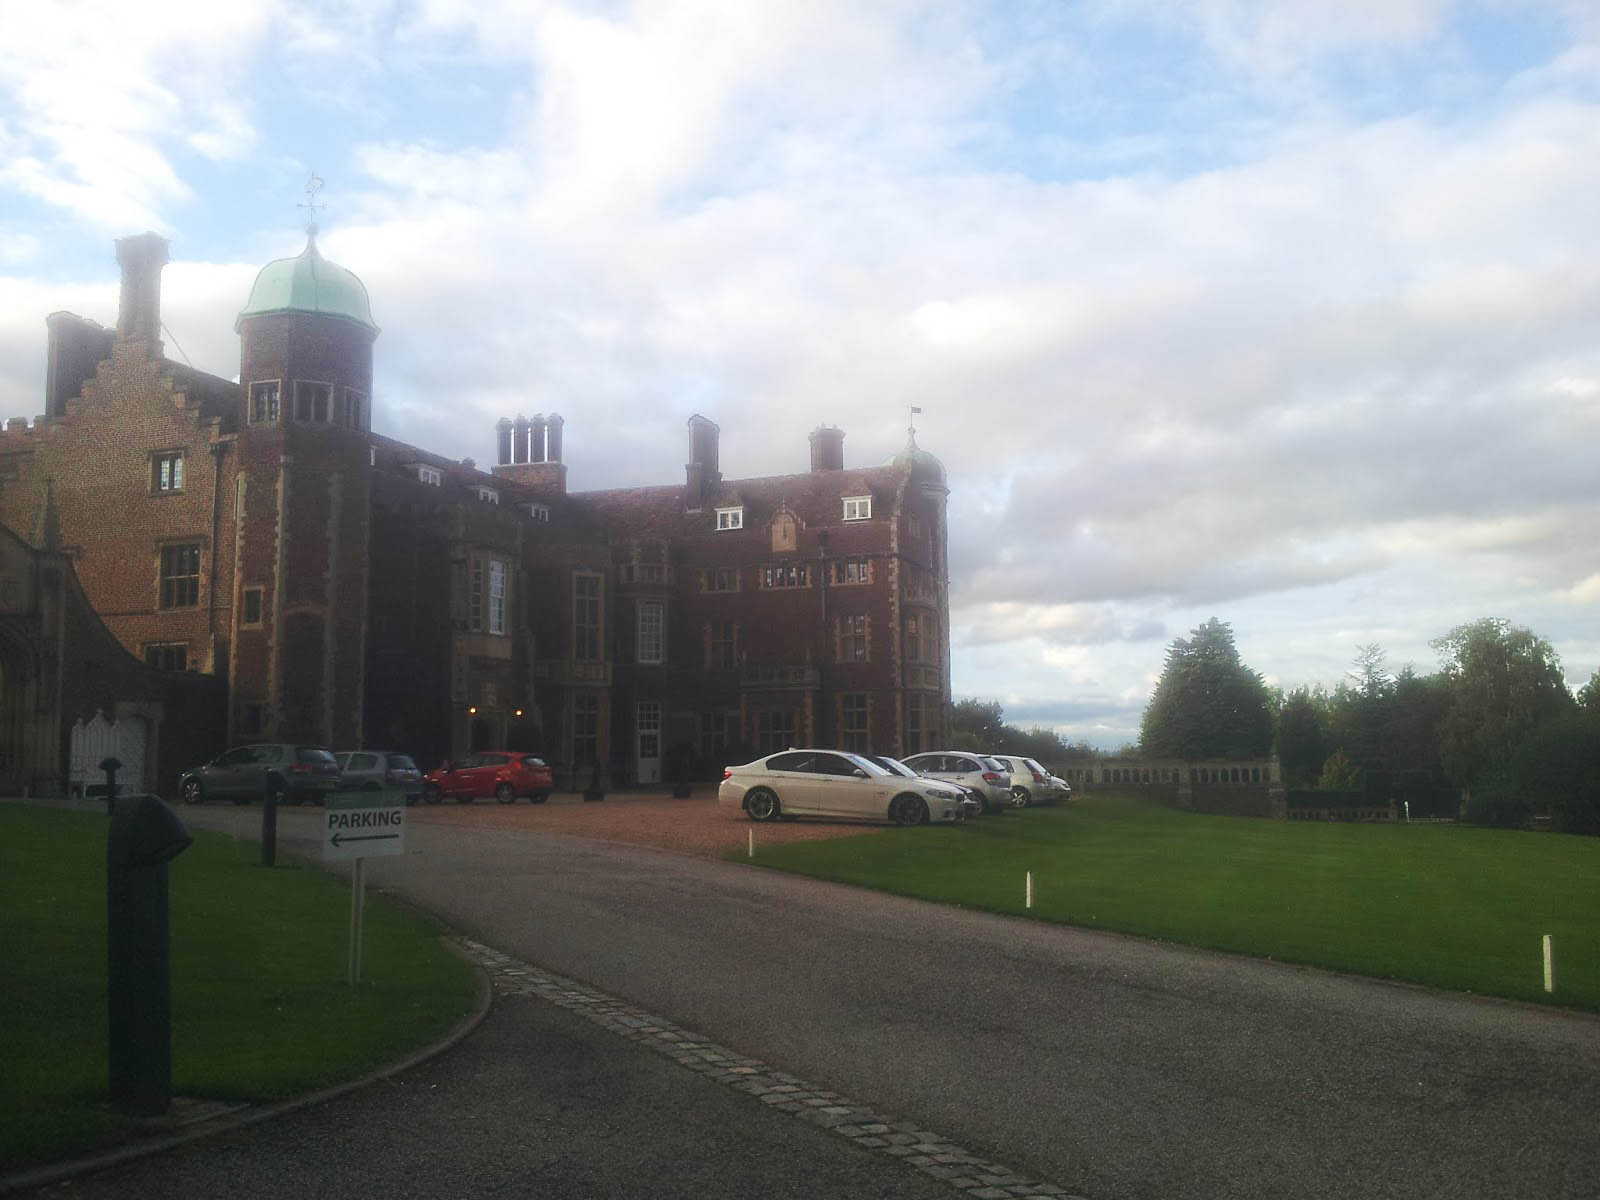 The current base of operations - Madingley Hall